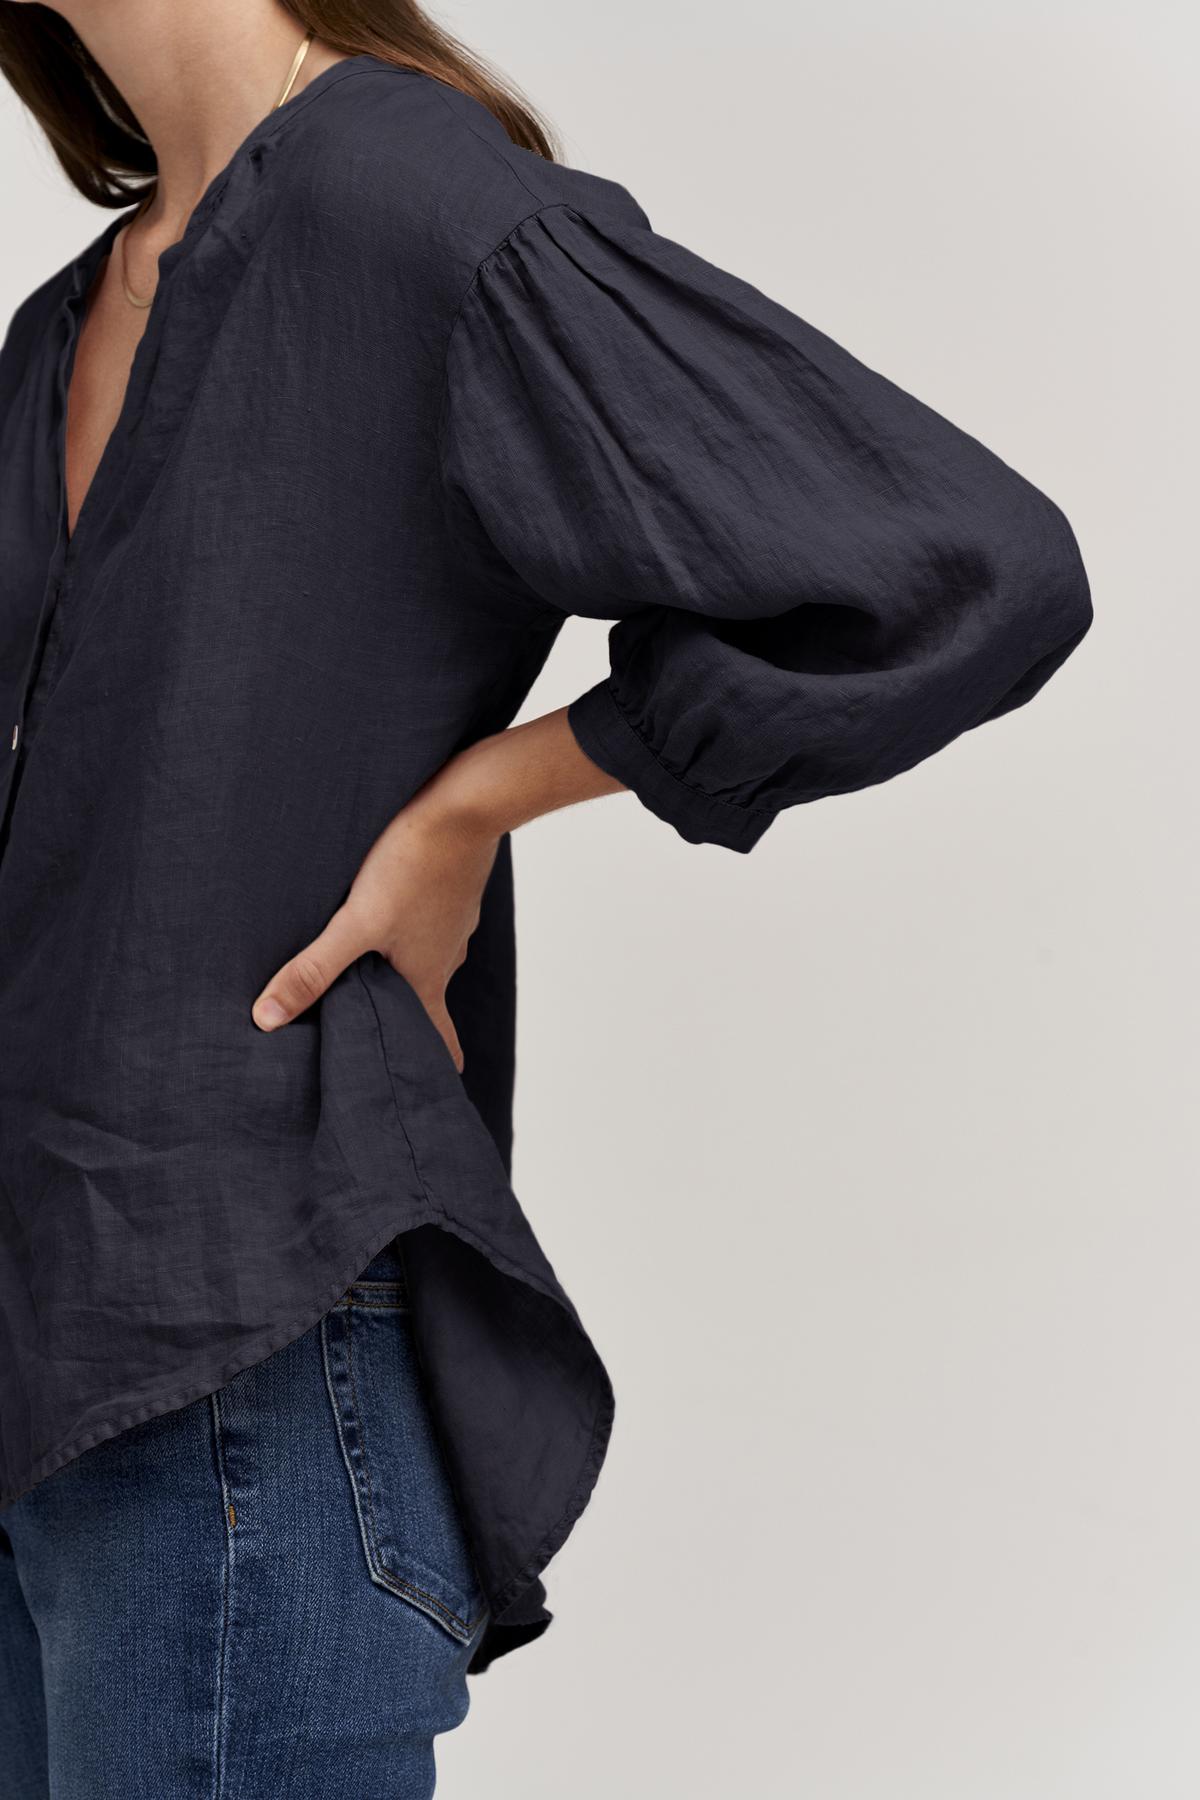   The model is wearing jeans and a Velvet by Graham & Spencer MATEA LINEN BUTTON-UP BLOUSE. 